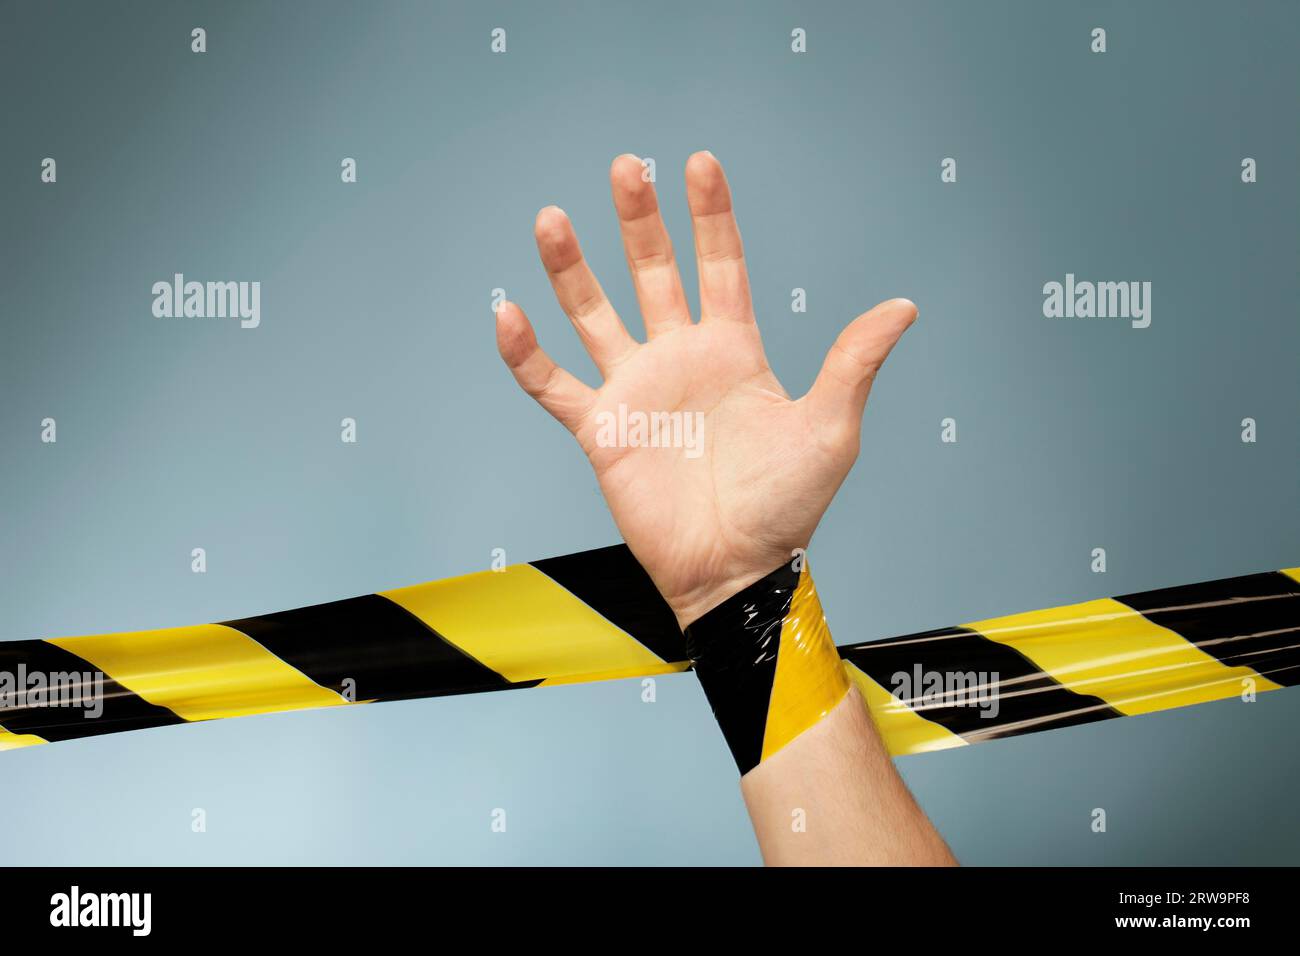 Hand tangled in yellow and black barrier tape Stock Photo